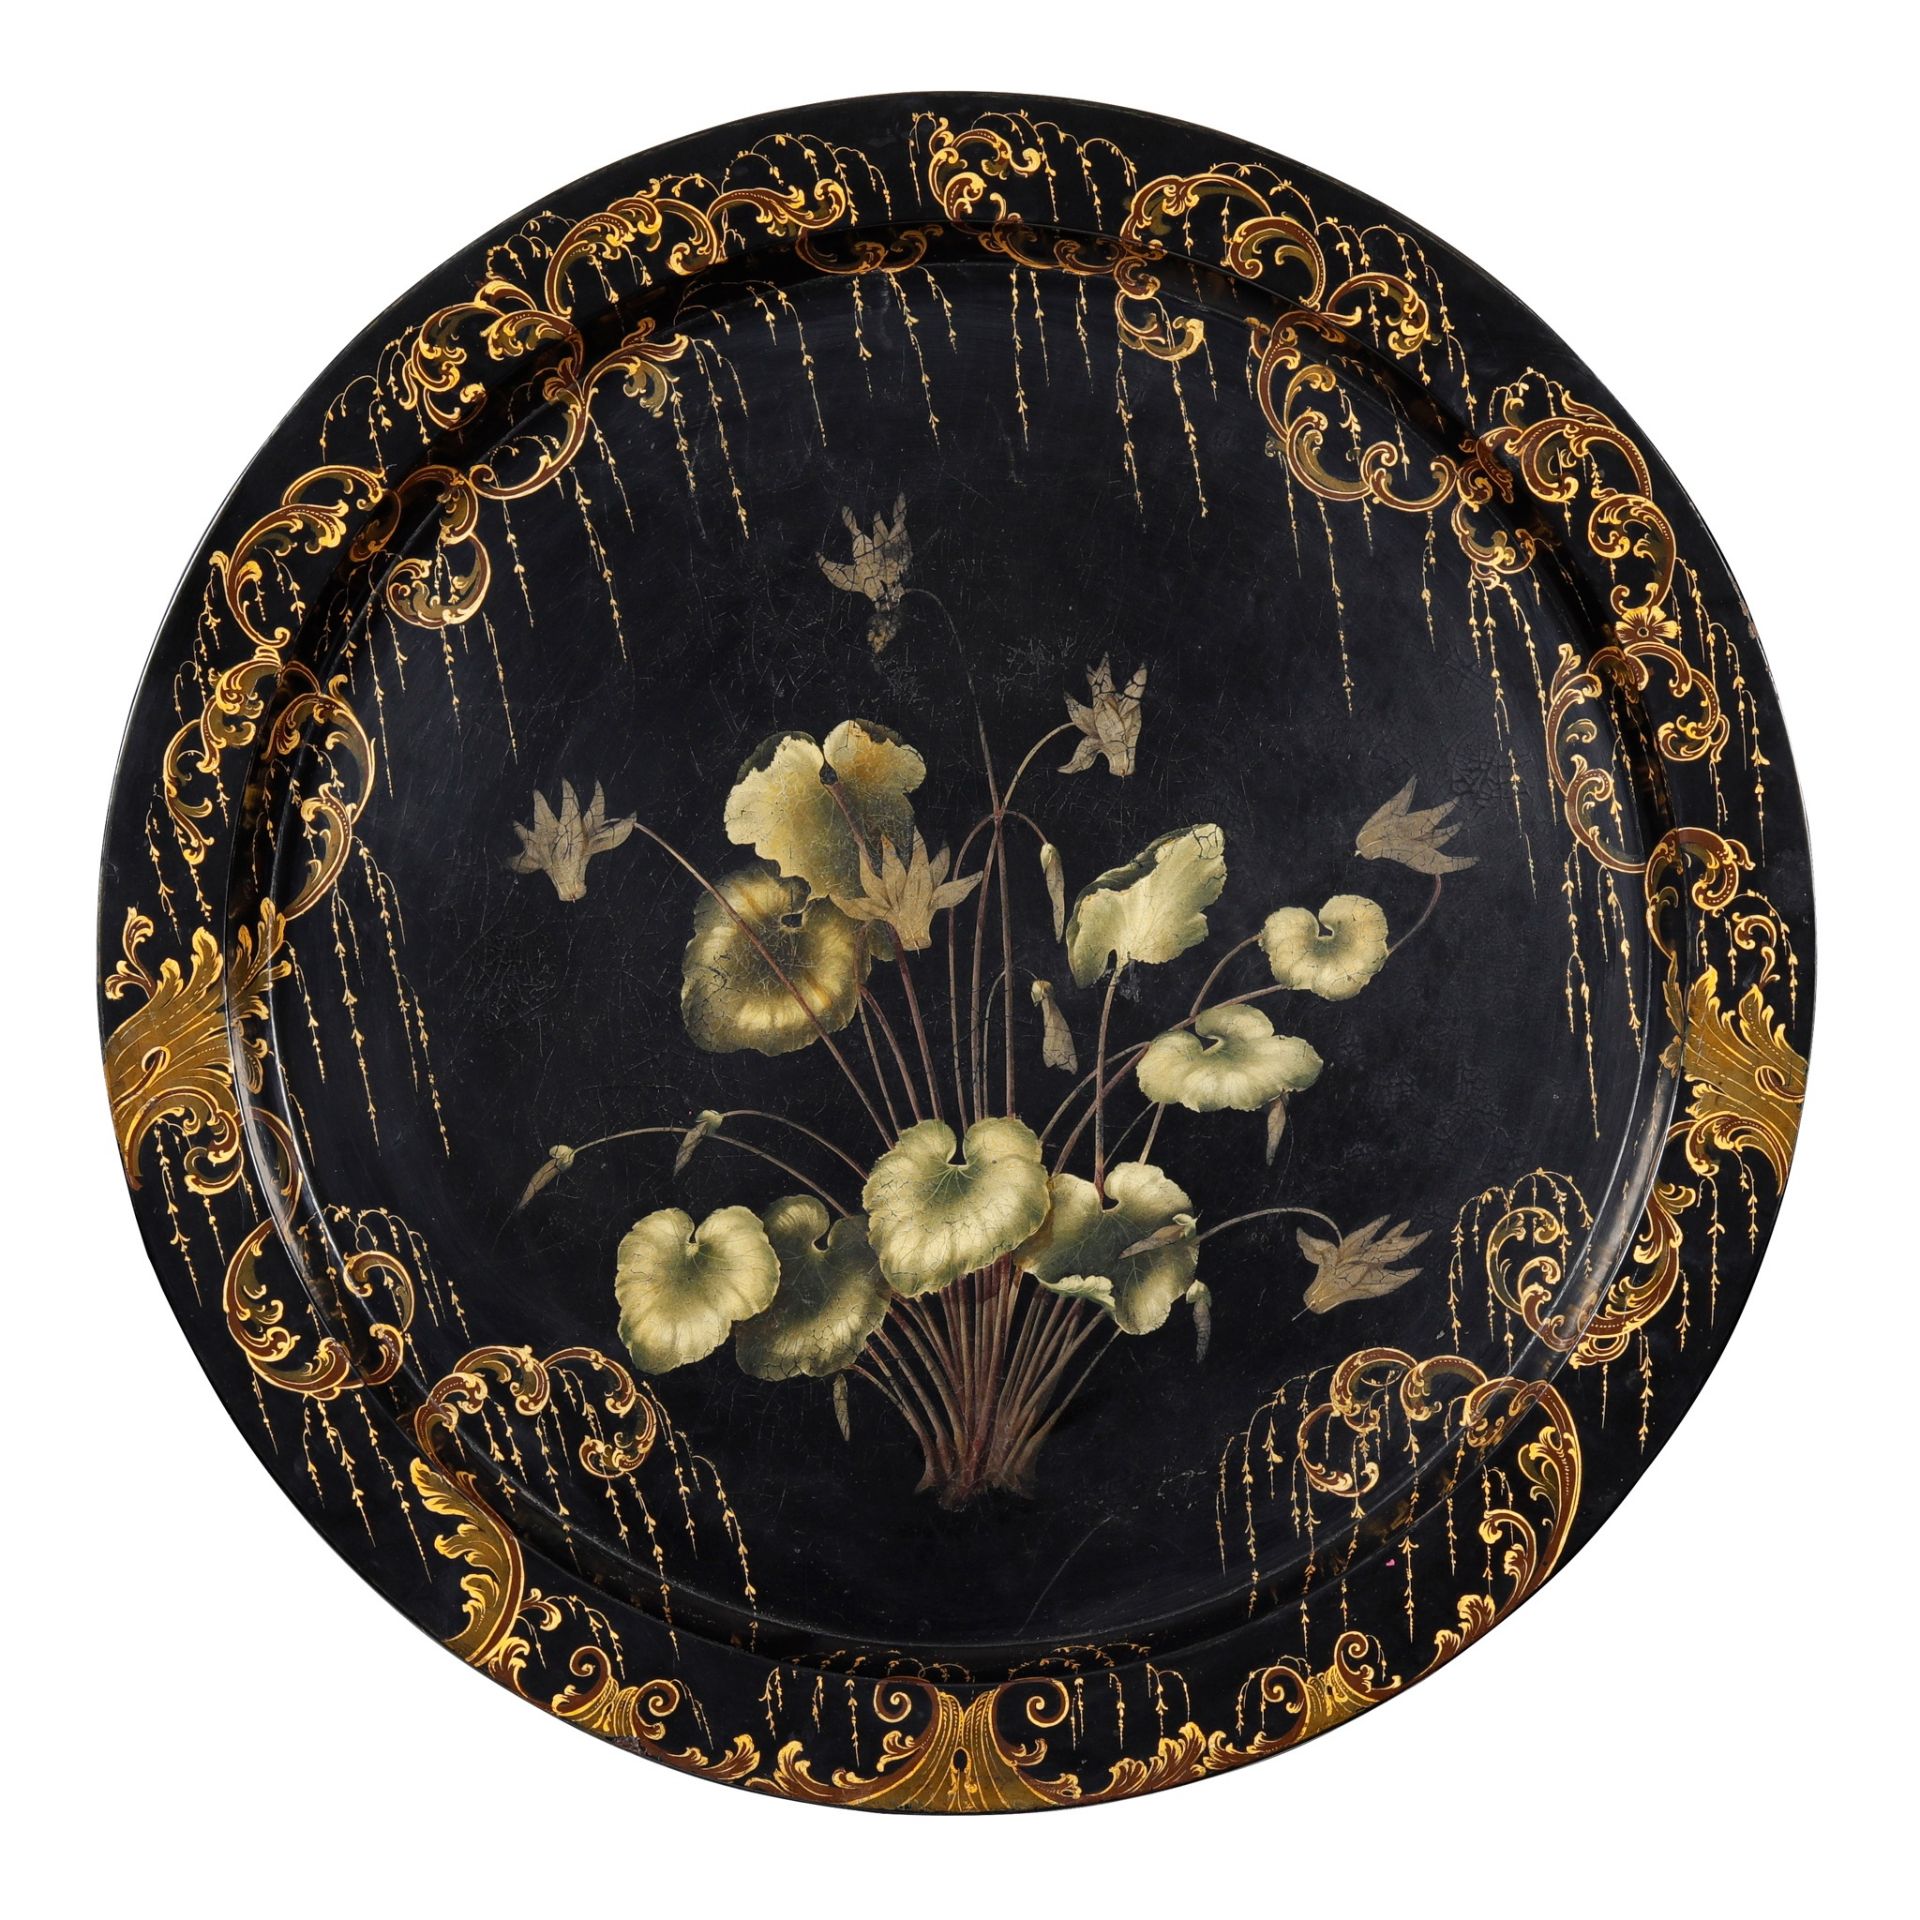 VICTORIAN PAPIER-MÂCHÉ CIRCULAR TRAY TABLE LATE 19TH CENTURY - Image 2 of 2